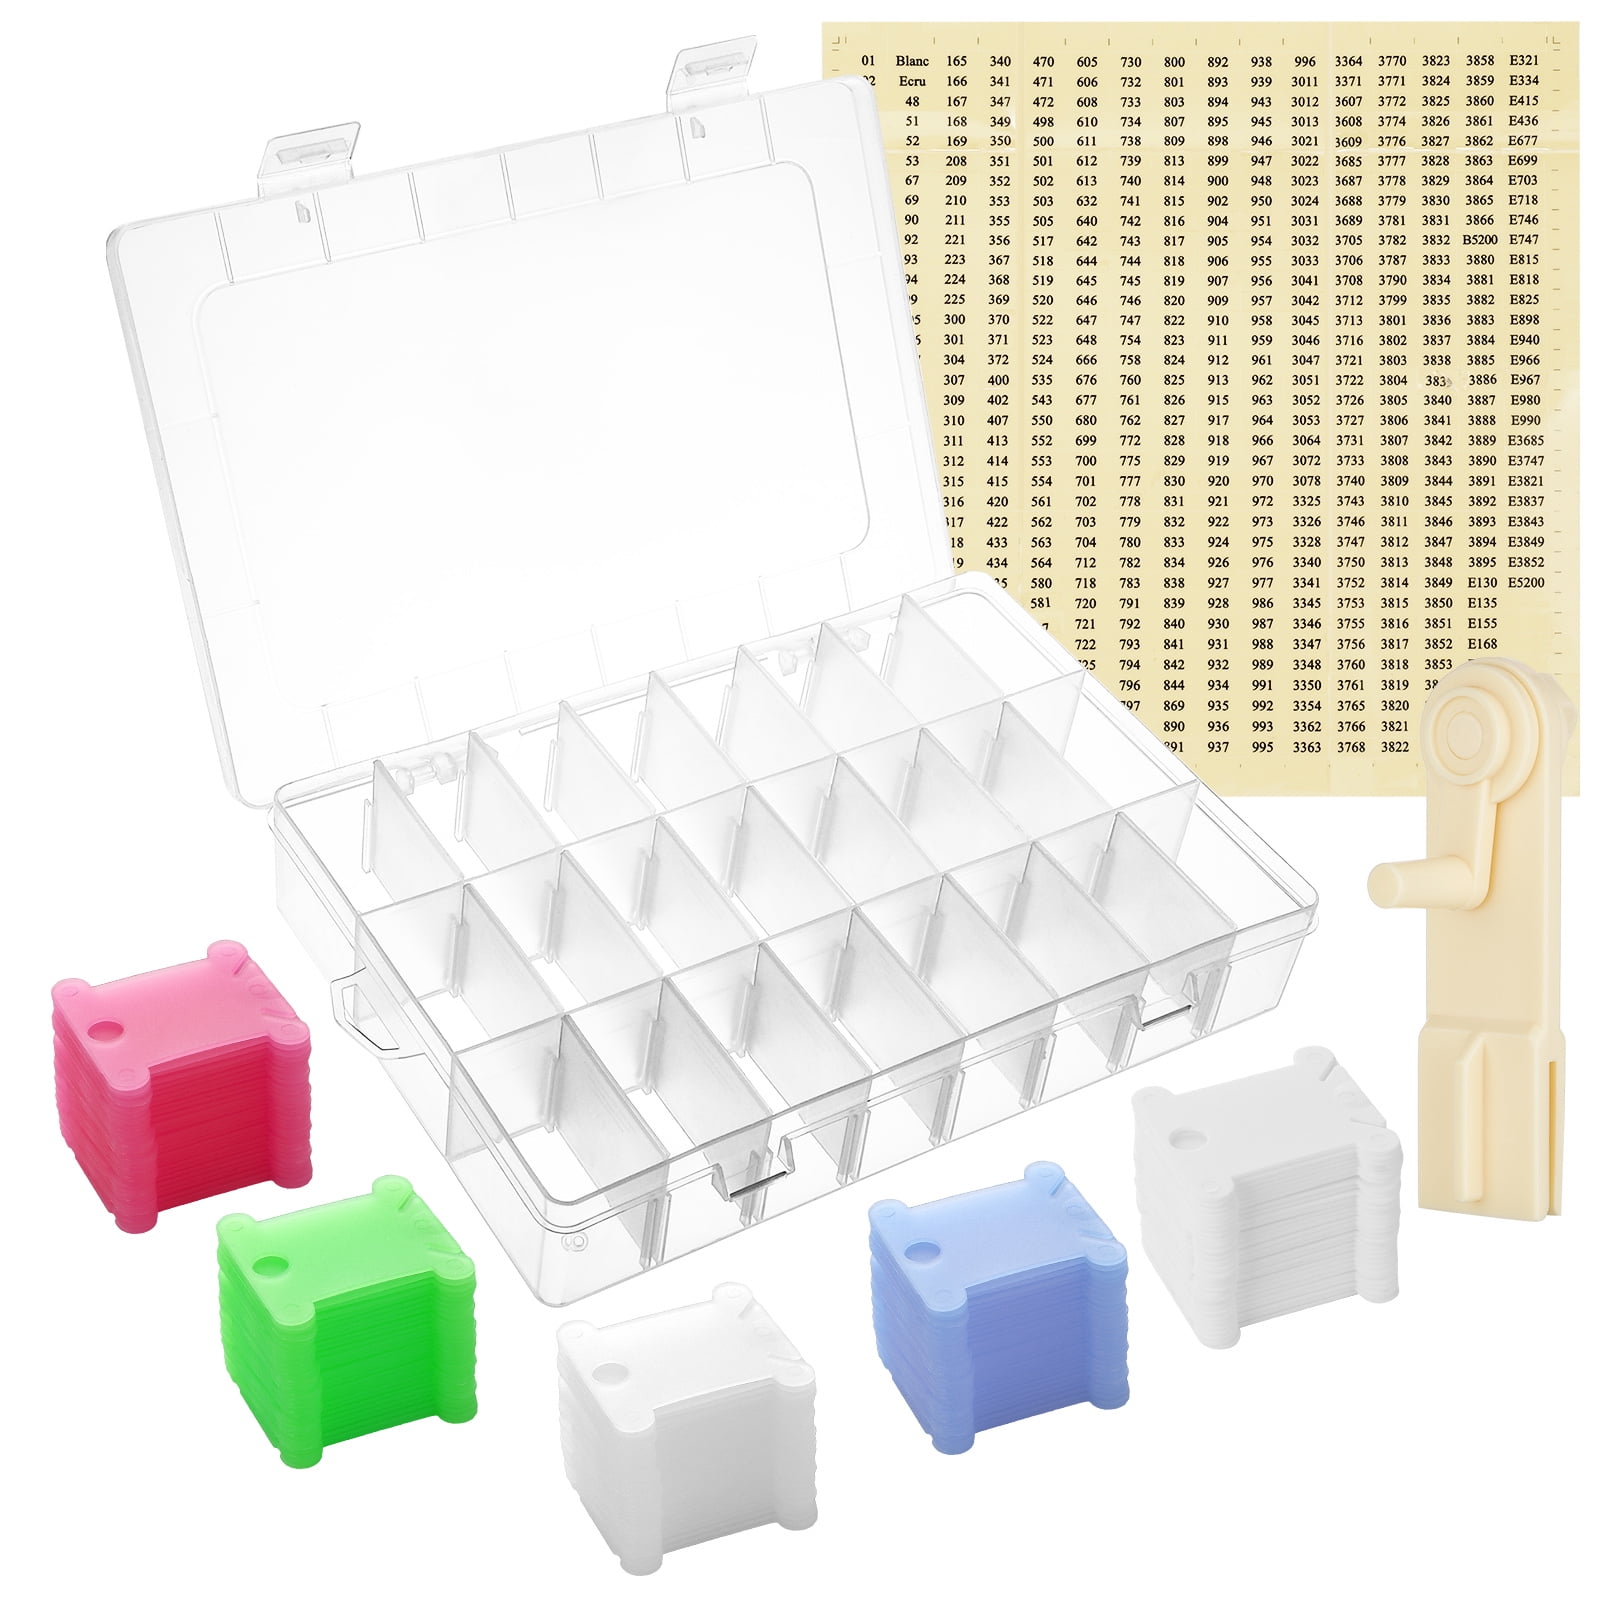 Armscye Plastic Embroidery Floss Organizer Box, Include 150 Pcs Colored Plastic Embroidery Floss Bobbins with Floss Winder and Stickers for Craft DIY